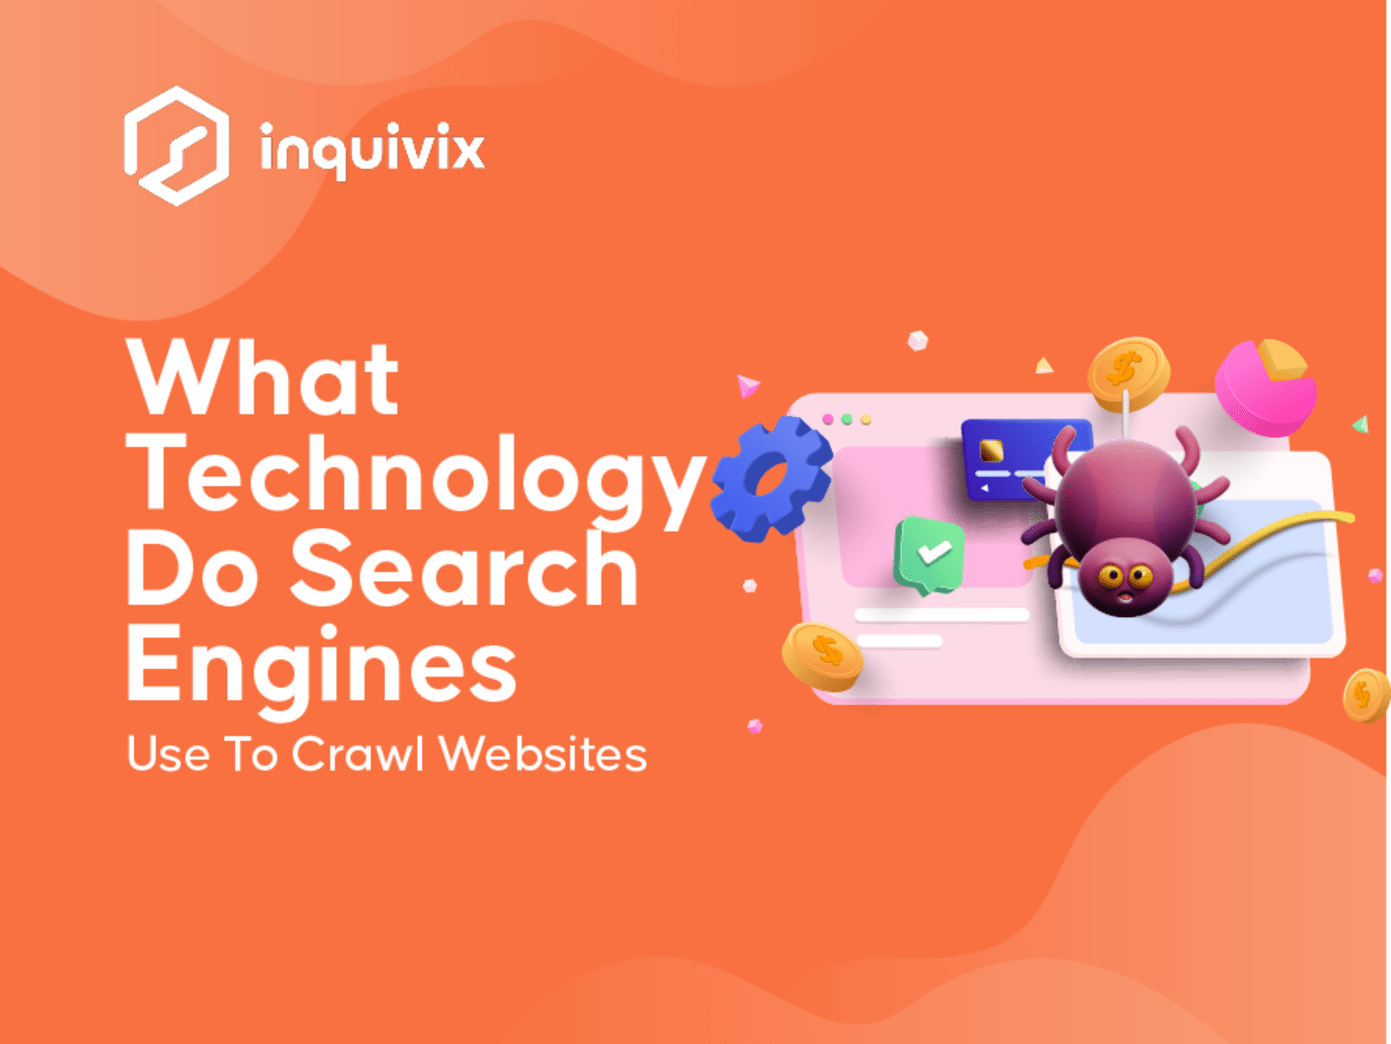 What Technology Do Search Engines Use To Crawl Websites?